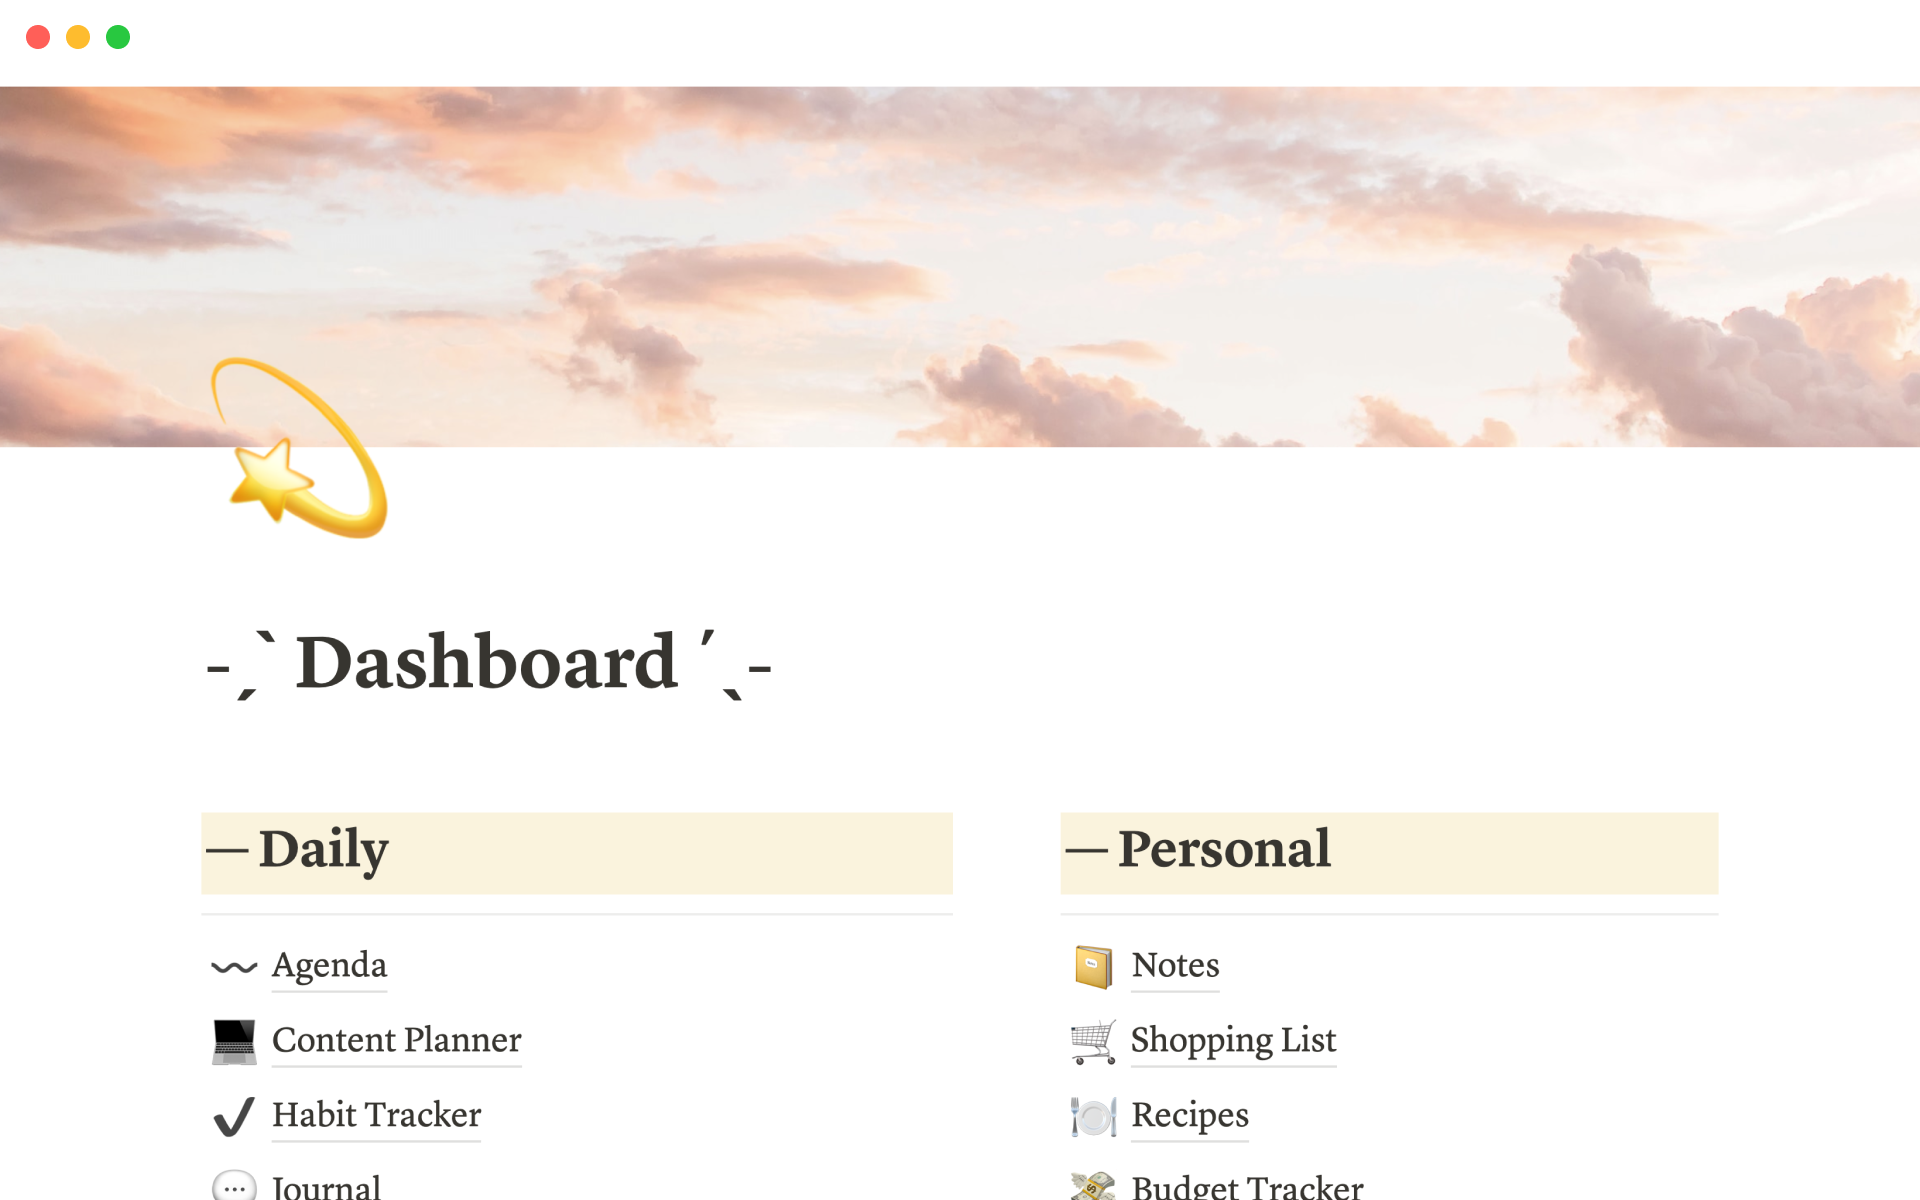 An all-in-one dashboard to help manage all aspects of your life.